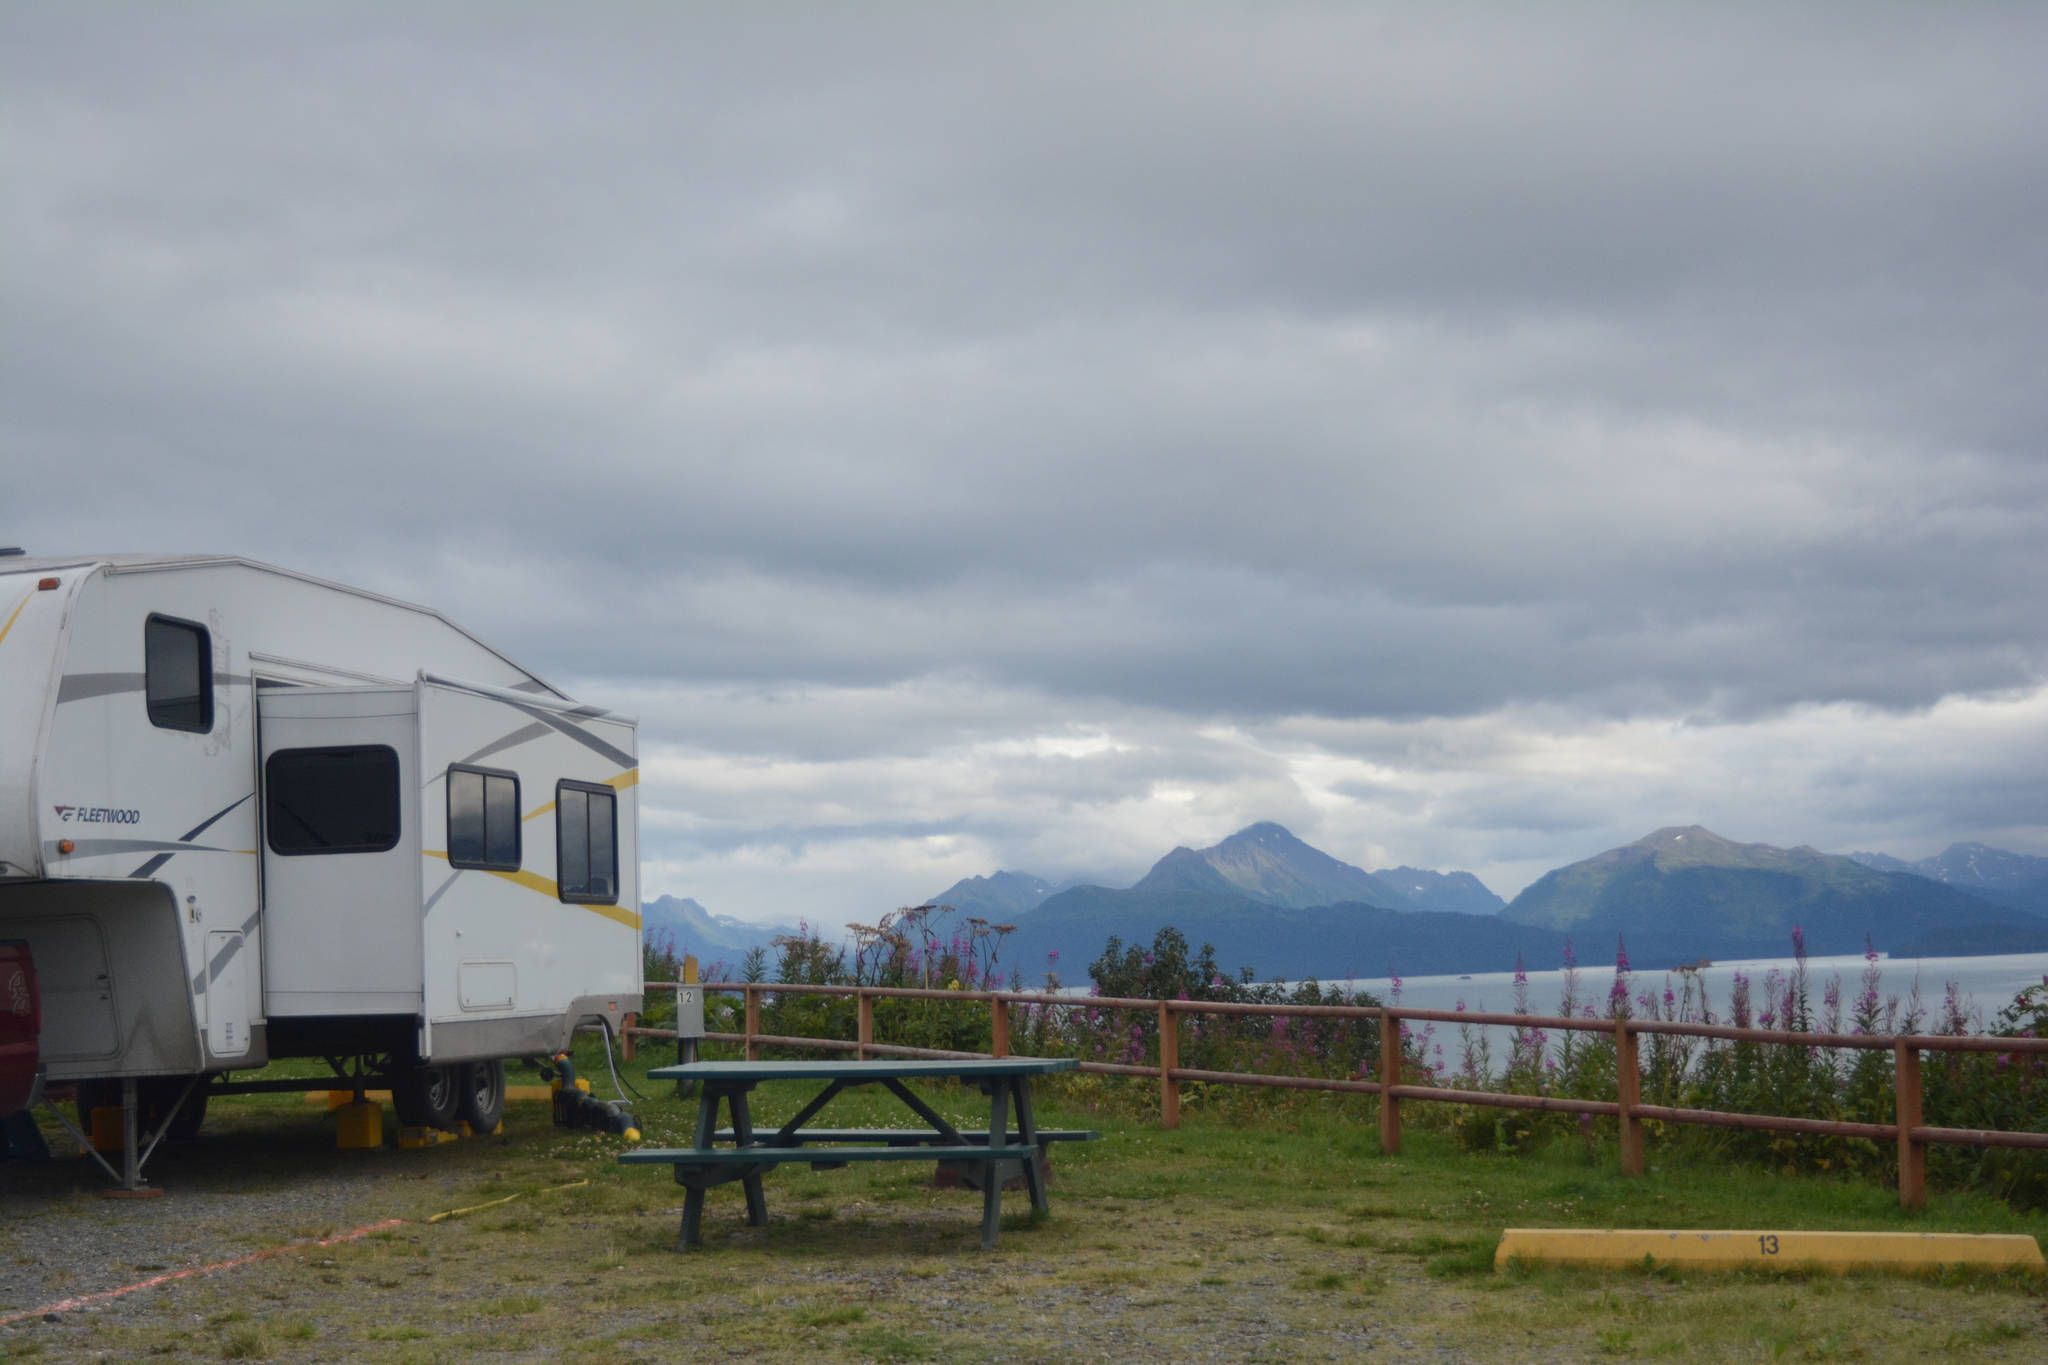 A campsite at Baycrest RV Park looks out over Kachemak Bay near Baycrest Hill in Homer, Alaska, on Aug, 18, 2018 at The Homer/Baycrest KOA Campground near Baycrest Hill in Homer, Alaska. Formerly the Baycrest RV Park, owners Shelly and Jeff Erickson made it a KOA campground in the fall of 2017. (Photo by Michael Armstrong/Homer News).